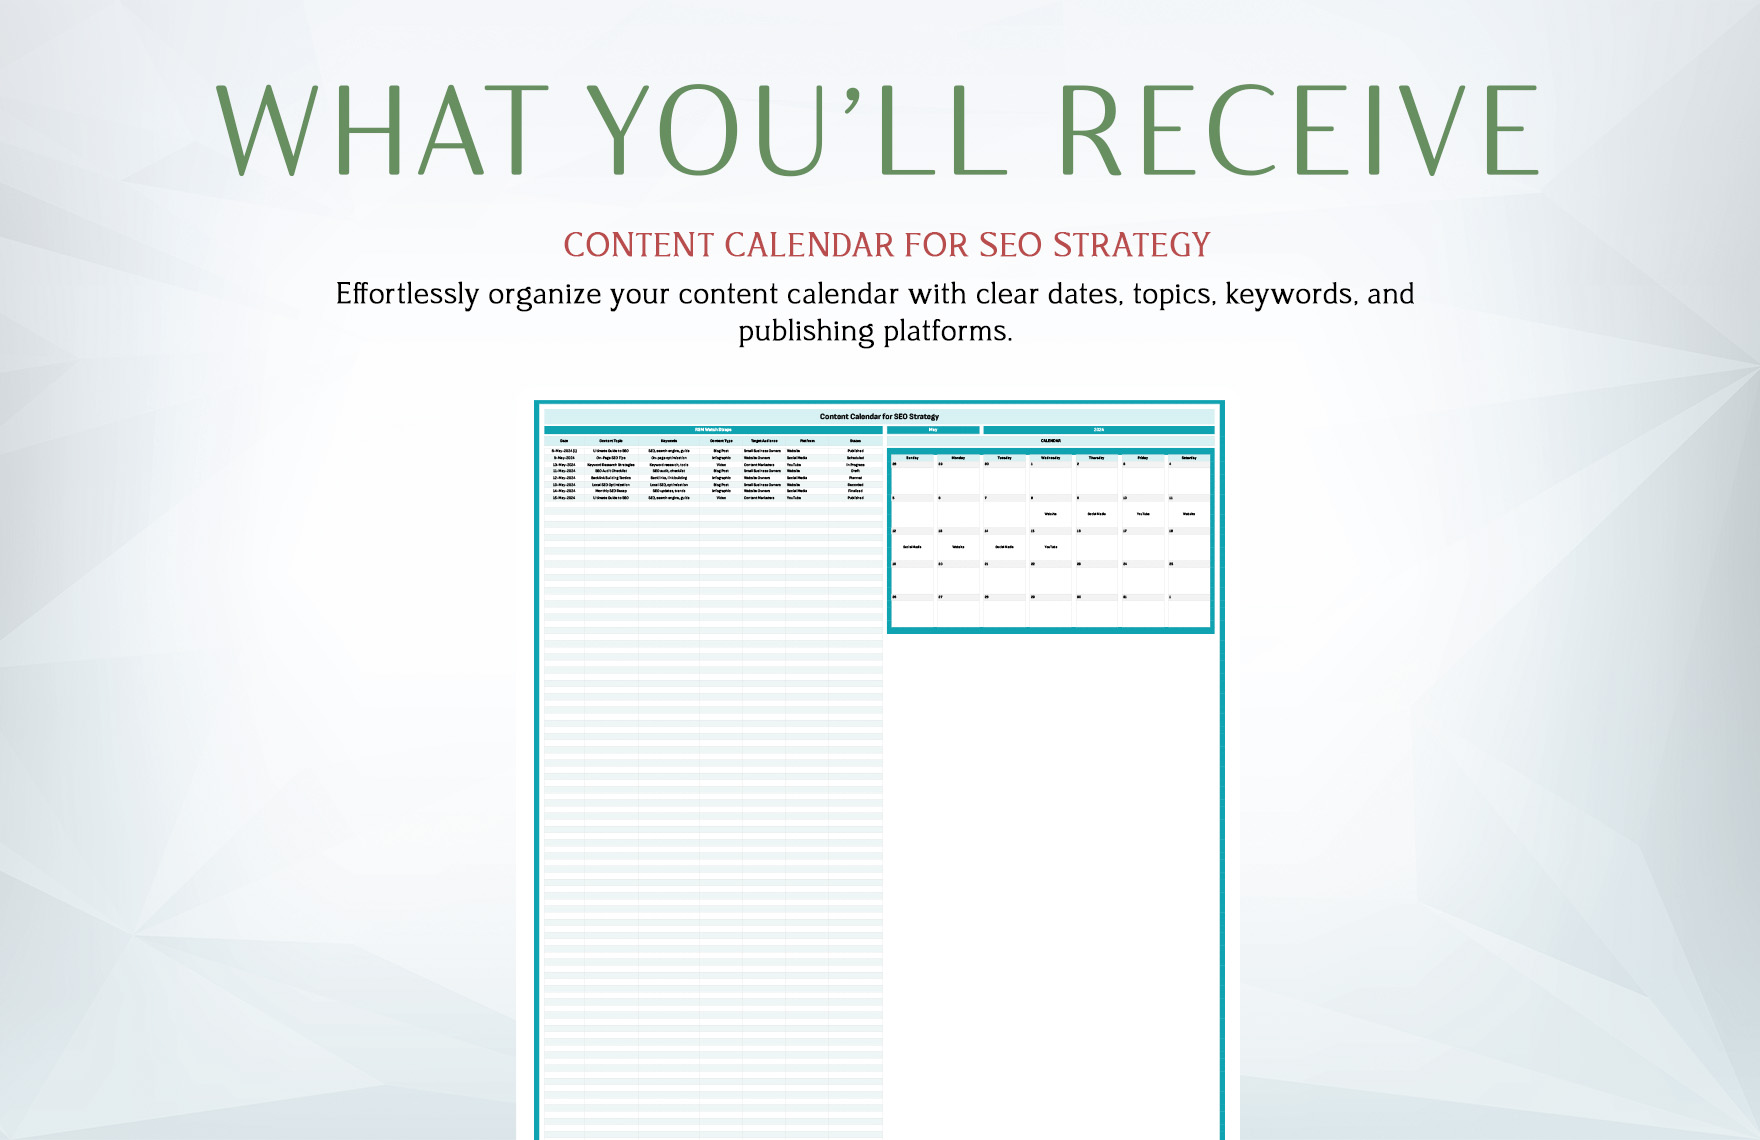 Content Calendar for SEO Strategy Template